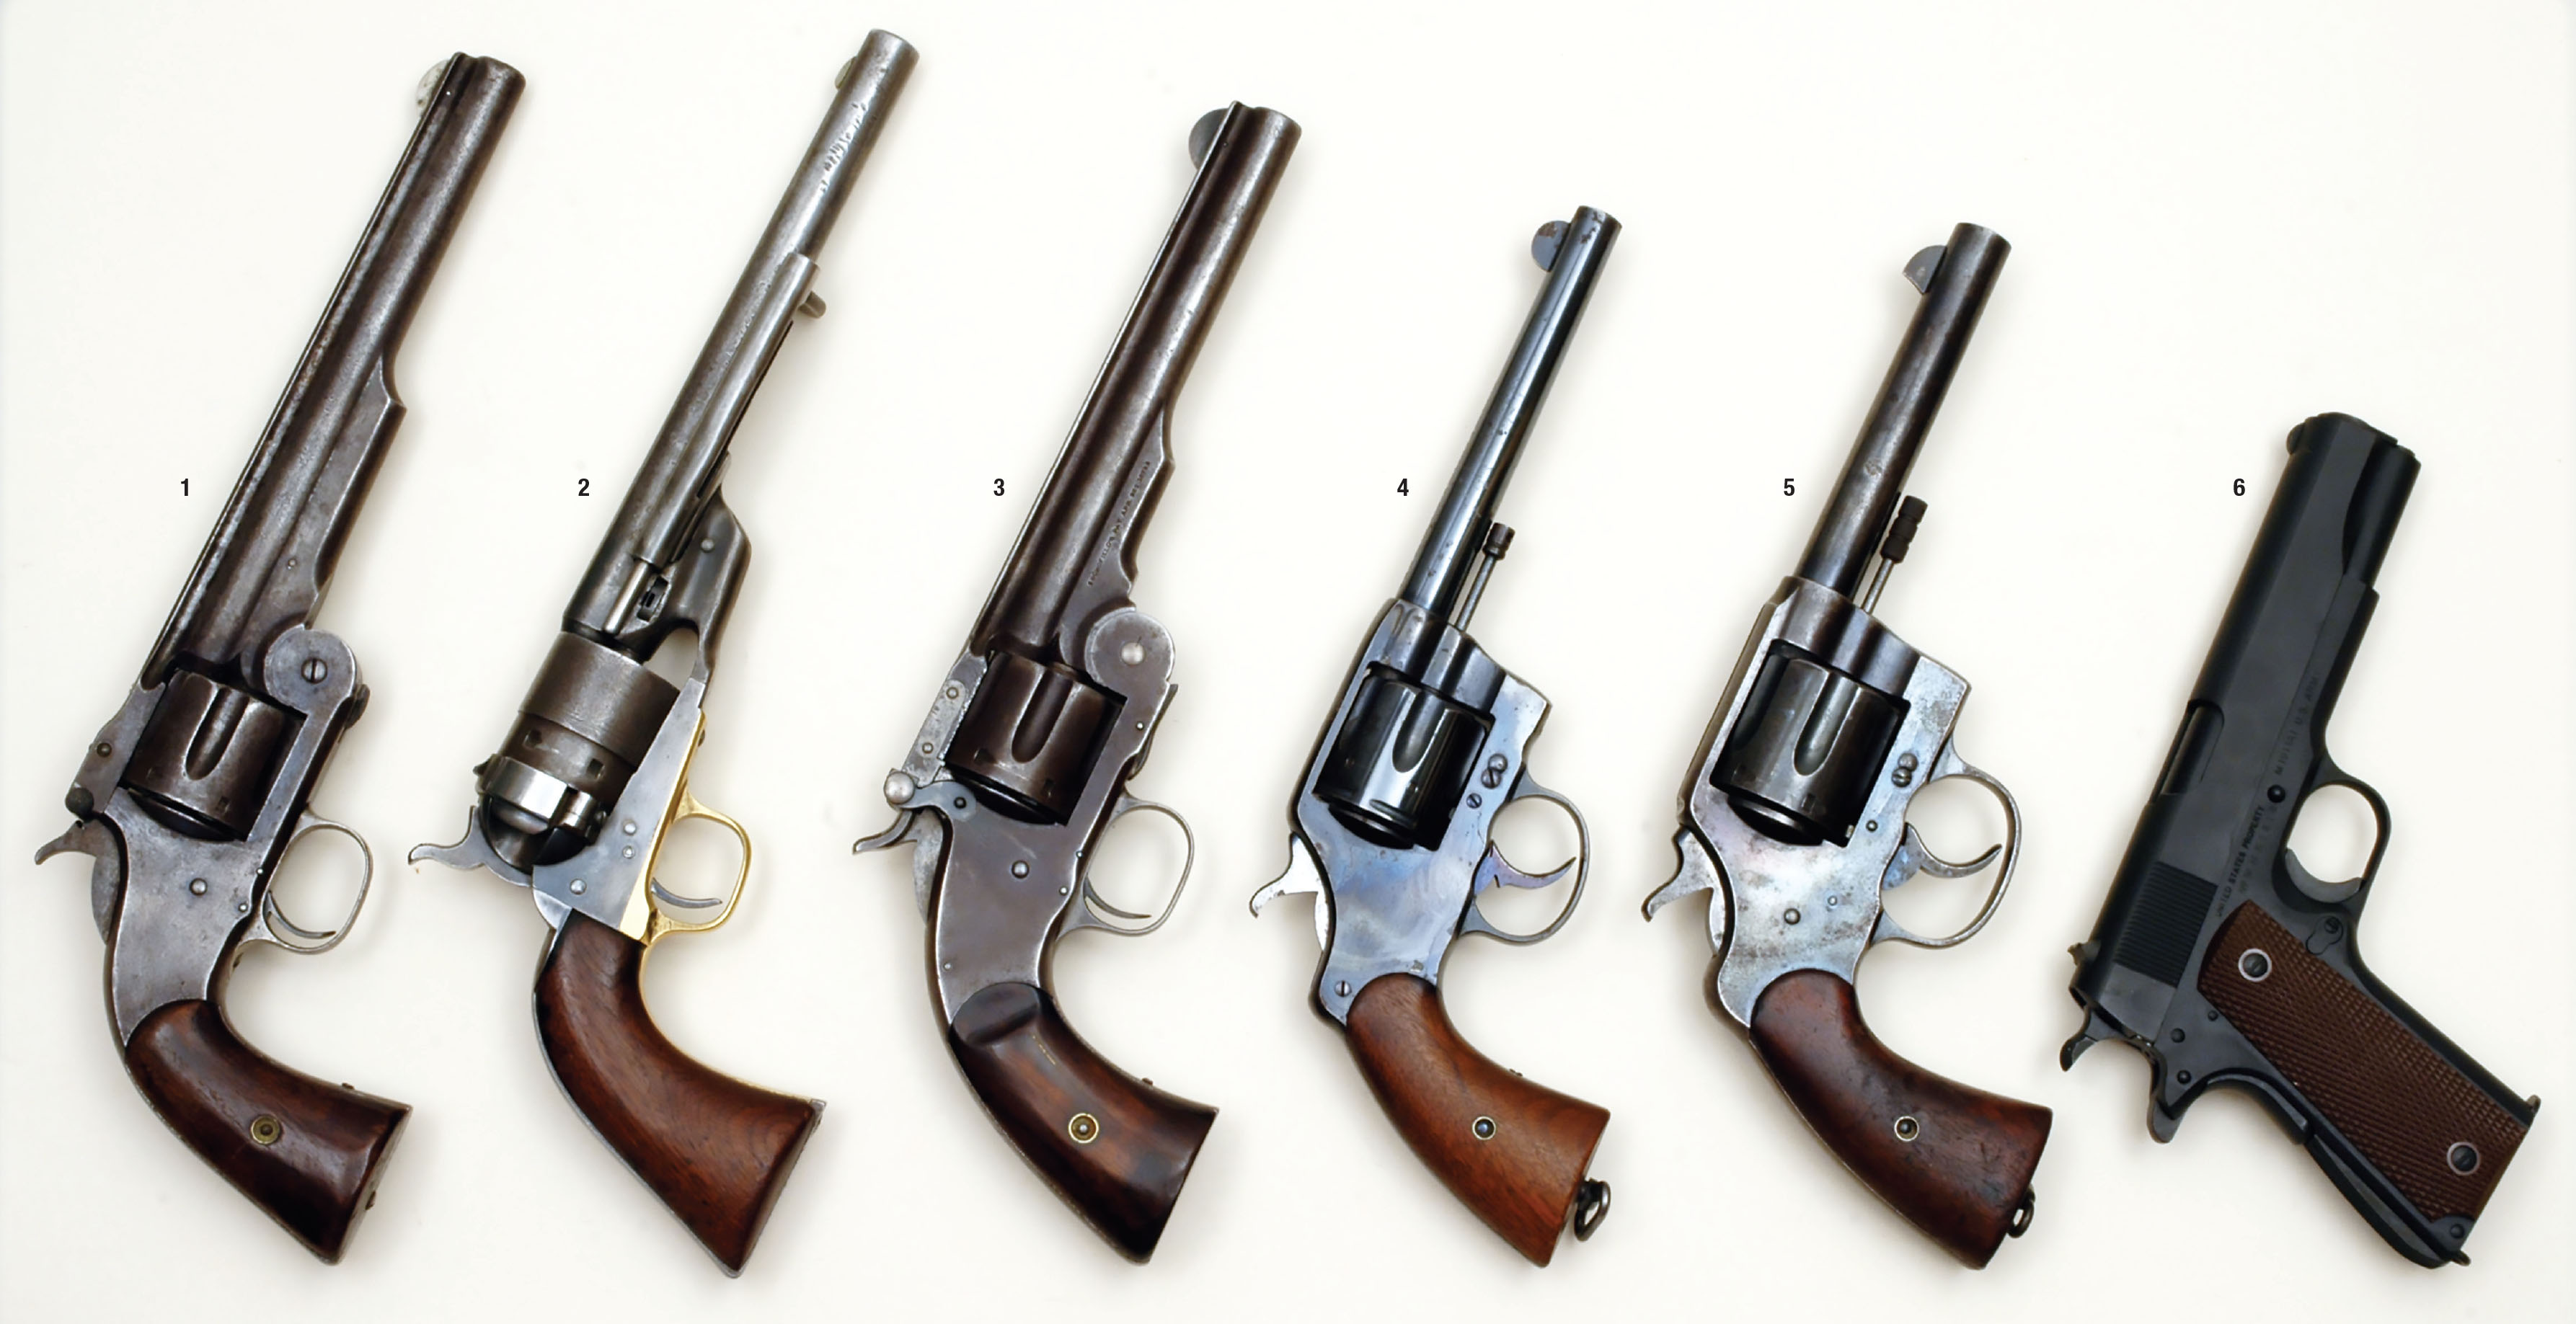 U.S. cavalry handguns: (1) Smith & Wesson No. 3 44 American, (2) Colt Model 1871 44 Colt, (3) Smith & Wesson No. 3 Schofield 45 S&W, (4) Colt Model 1903 38 Long Colt, (5) Colt Model 1909 and (6) Colt Model 1911A1. Missing is a Colt Single Action Army 45.